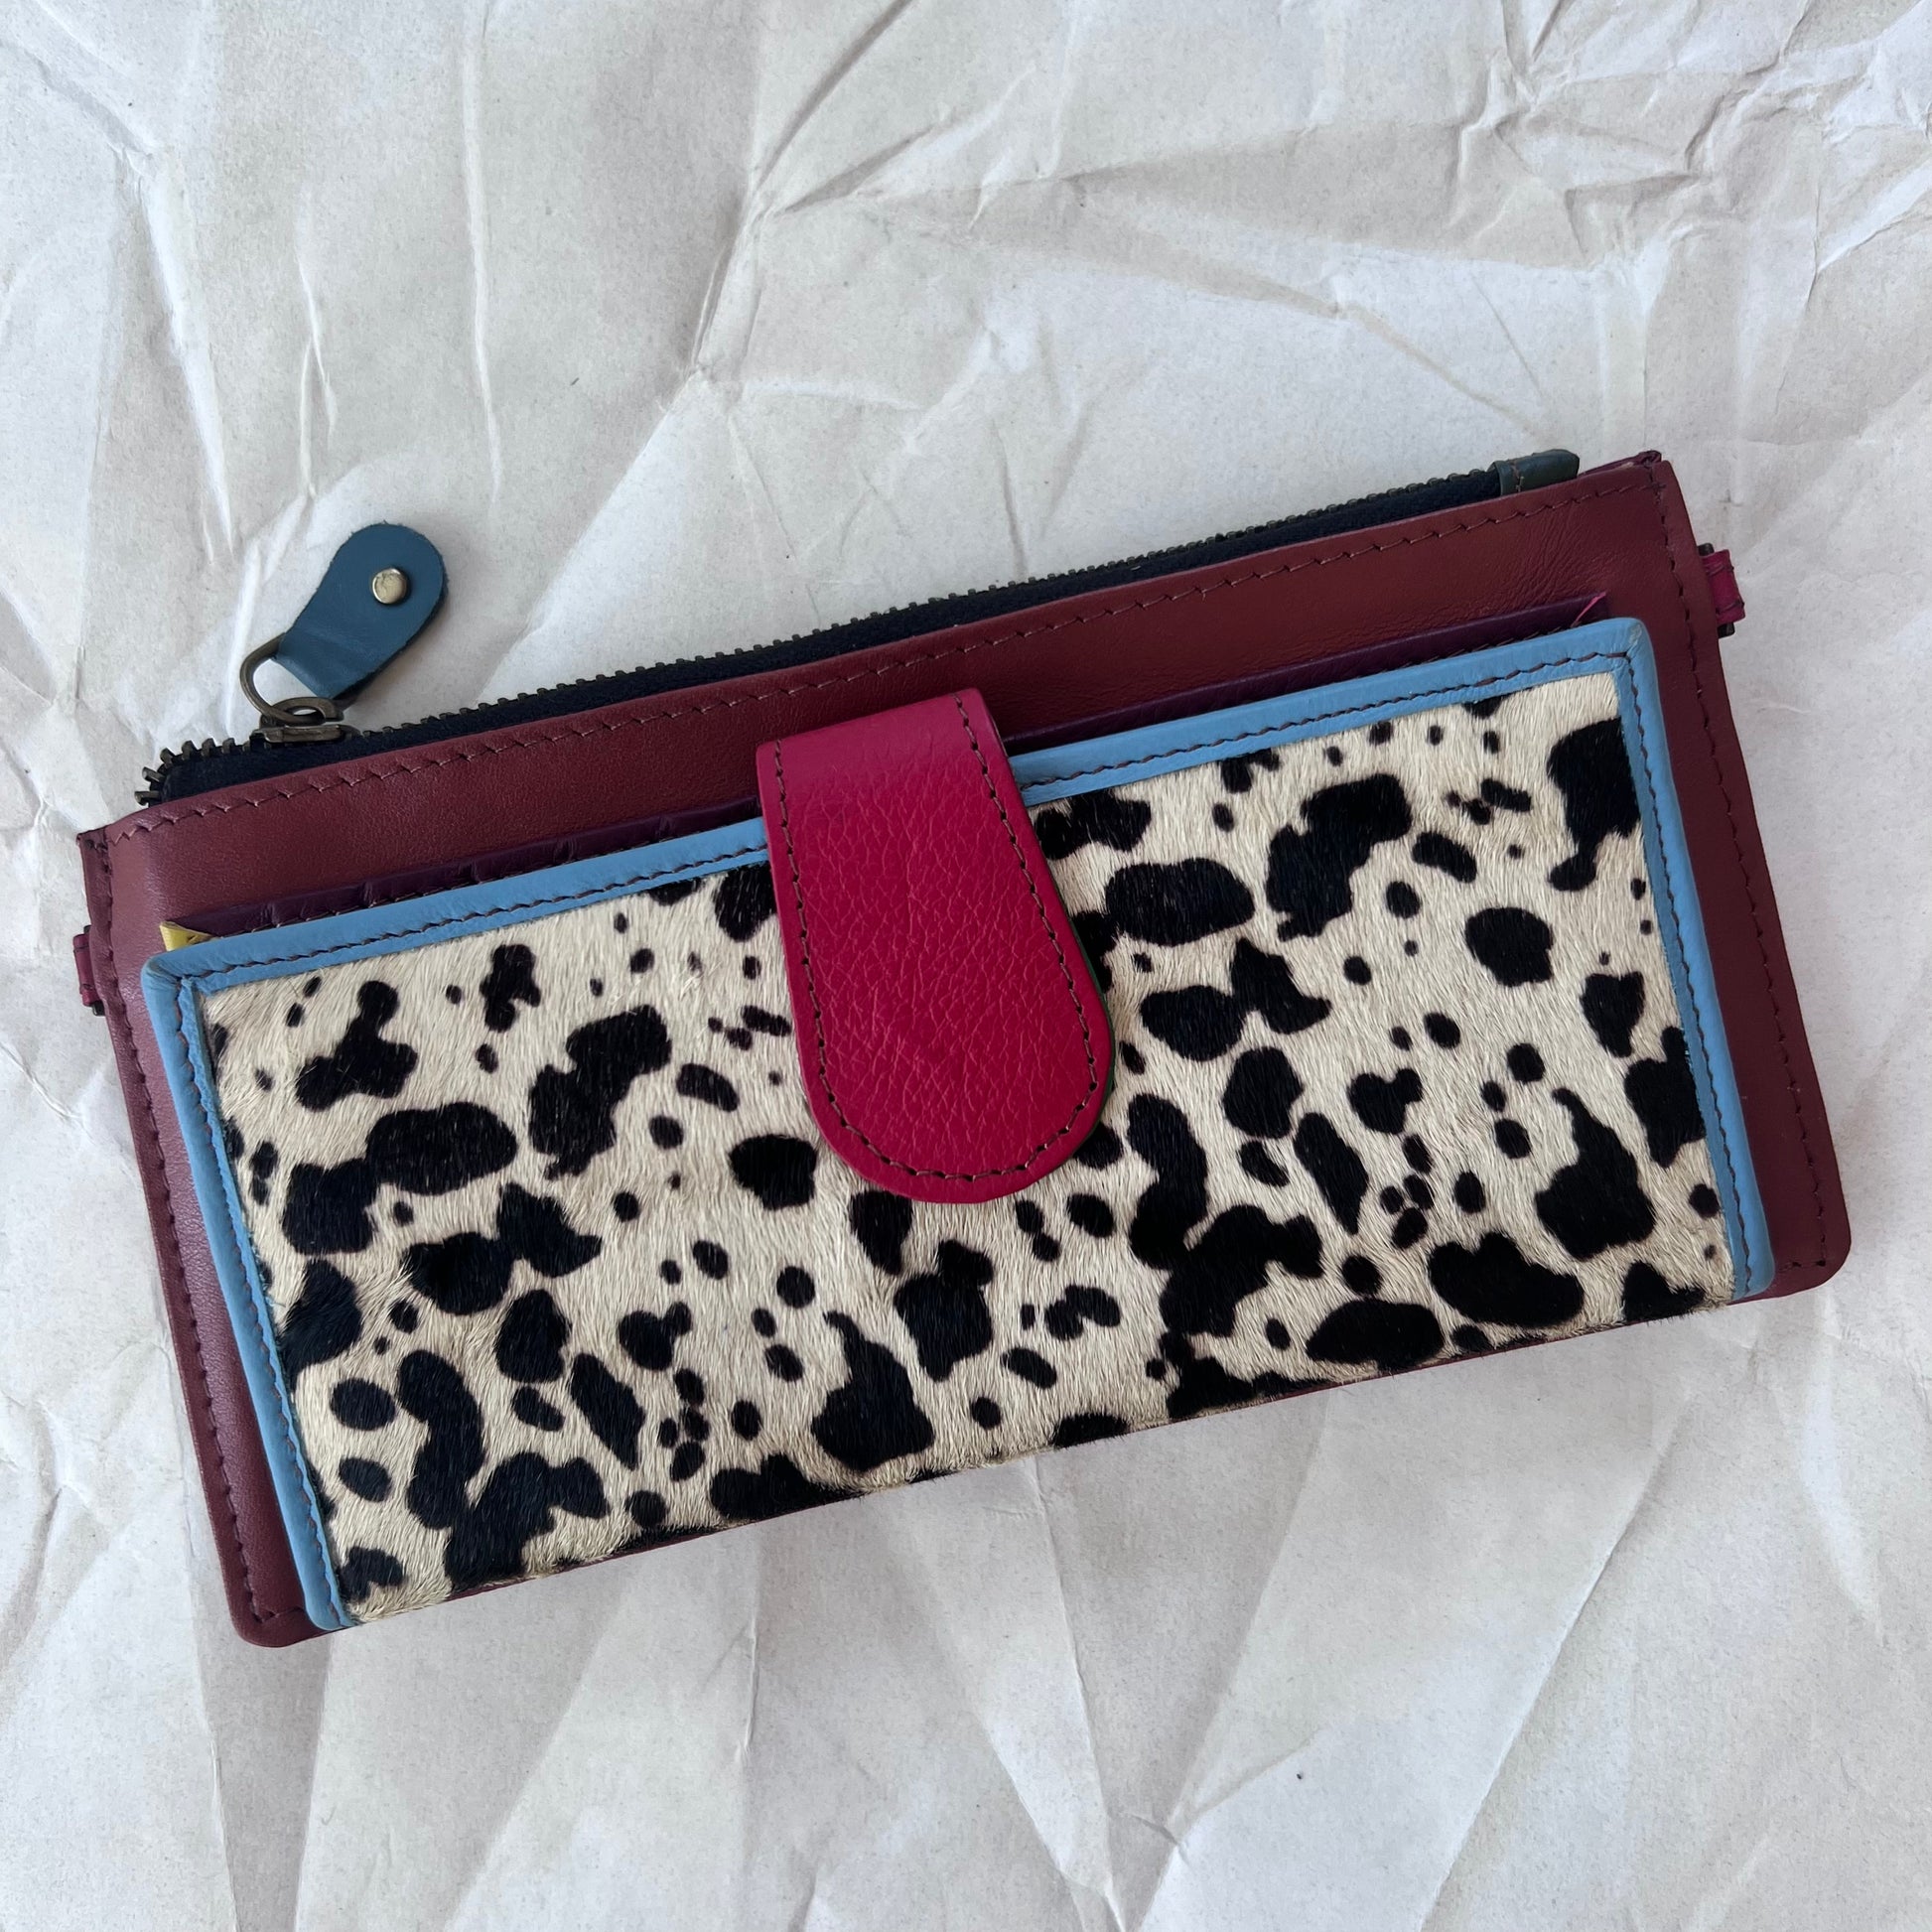 rectanglar dark red wallet with black and white spotted animal print pocket and red tab closure.